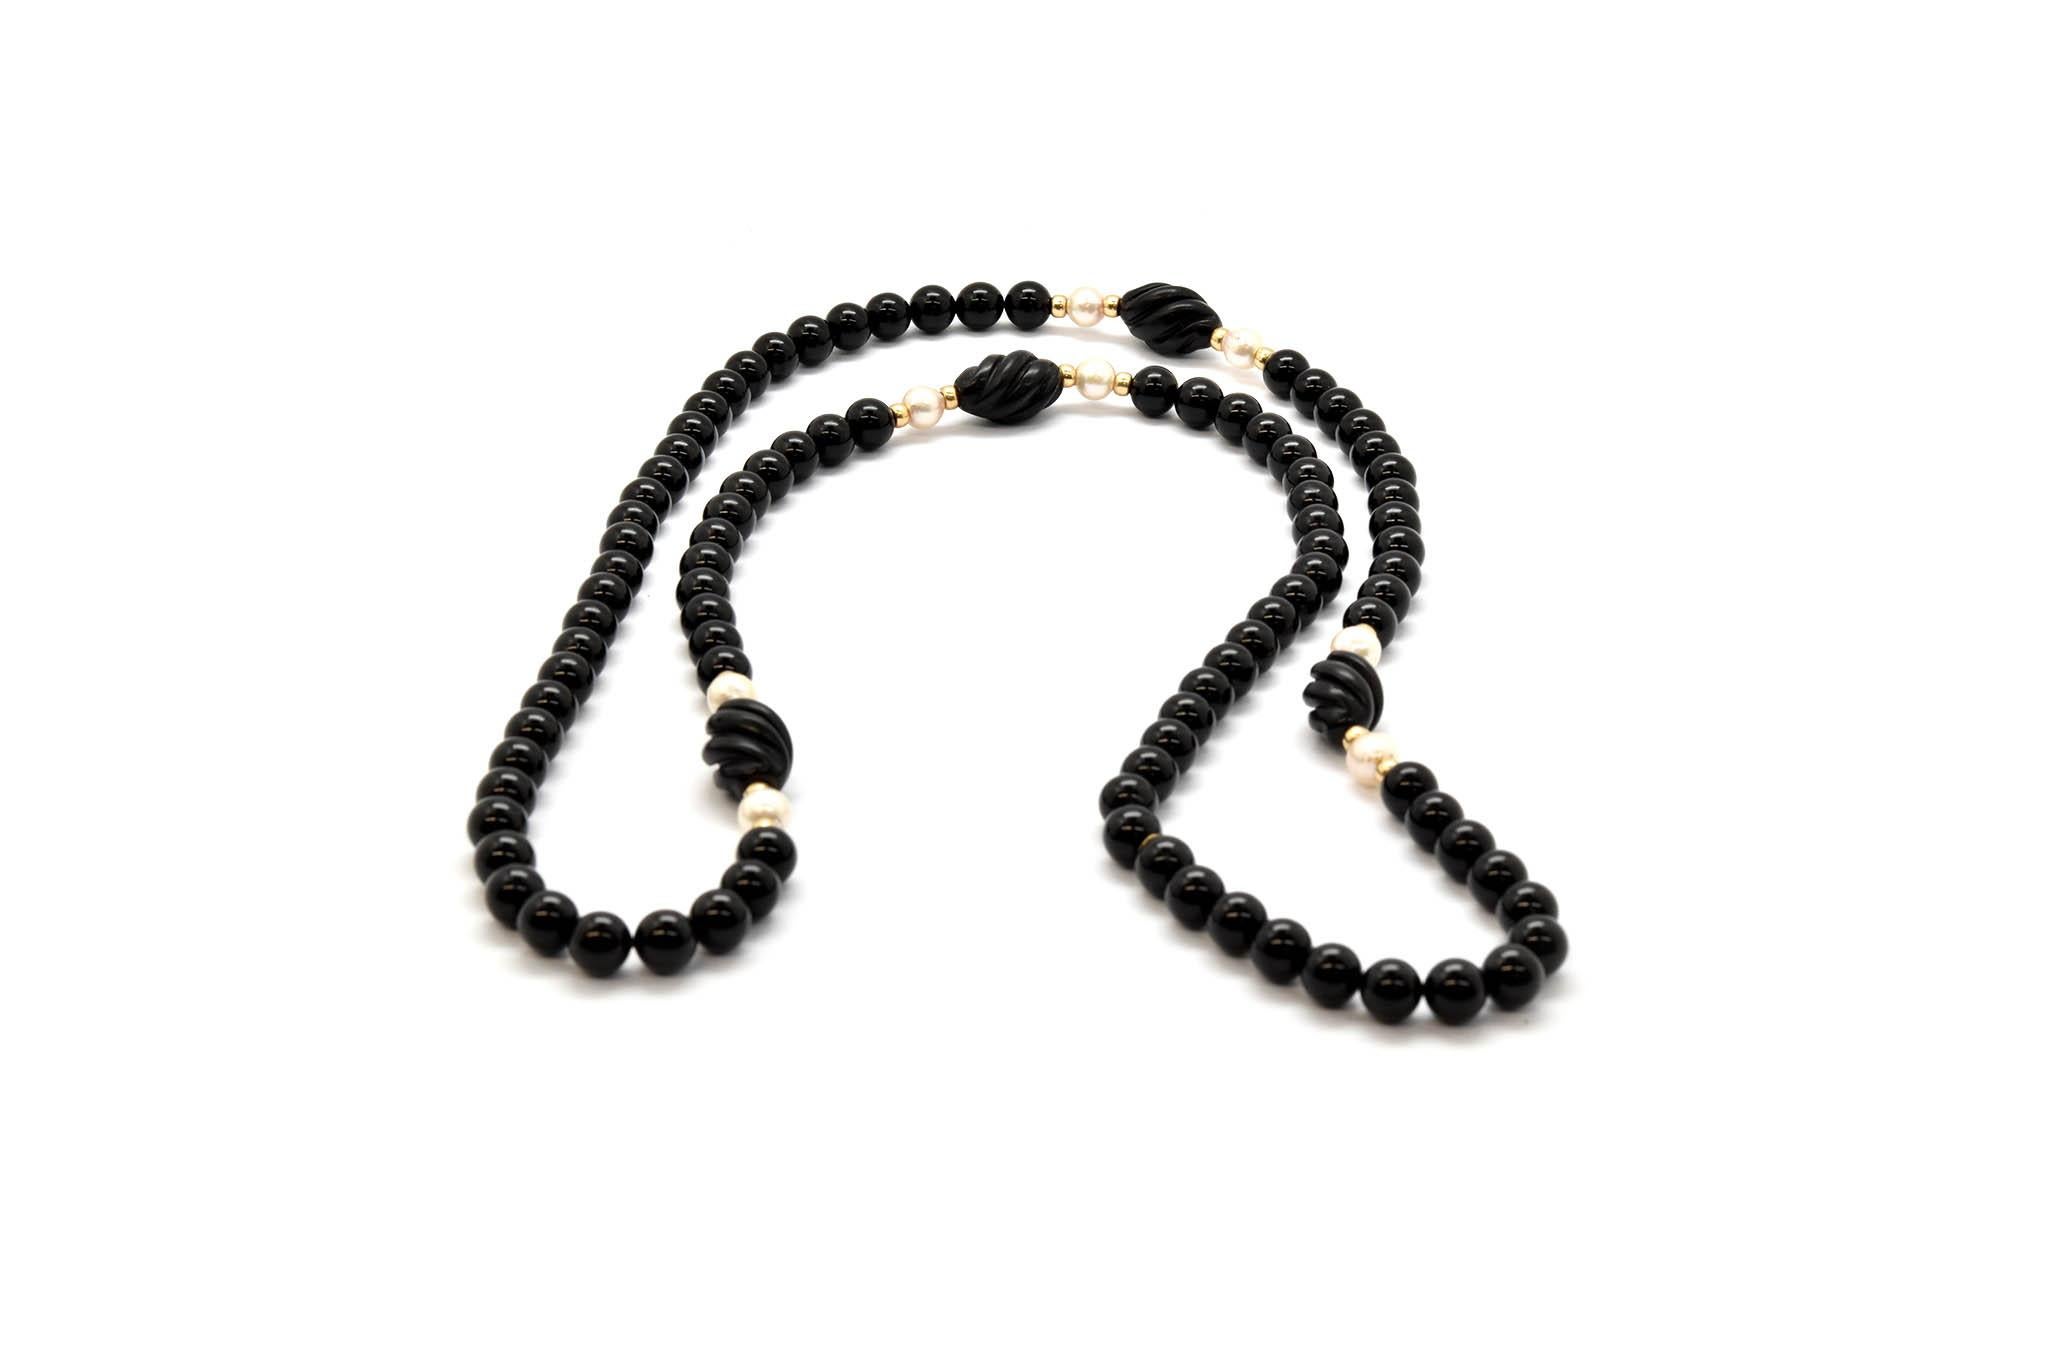 This is a beautiful 34” inch strand of black onyx beads with 14k yellow gold bead and pearl accents! There are sixteen 14k yellow gold bead accents, stationed between each accent, are 7mm freshwater pearl beads. In between the yellow gold and pearl